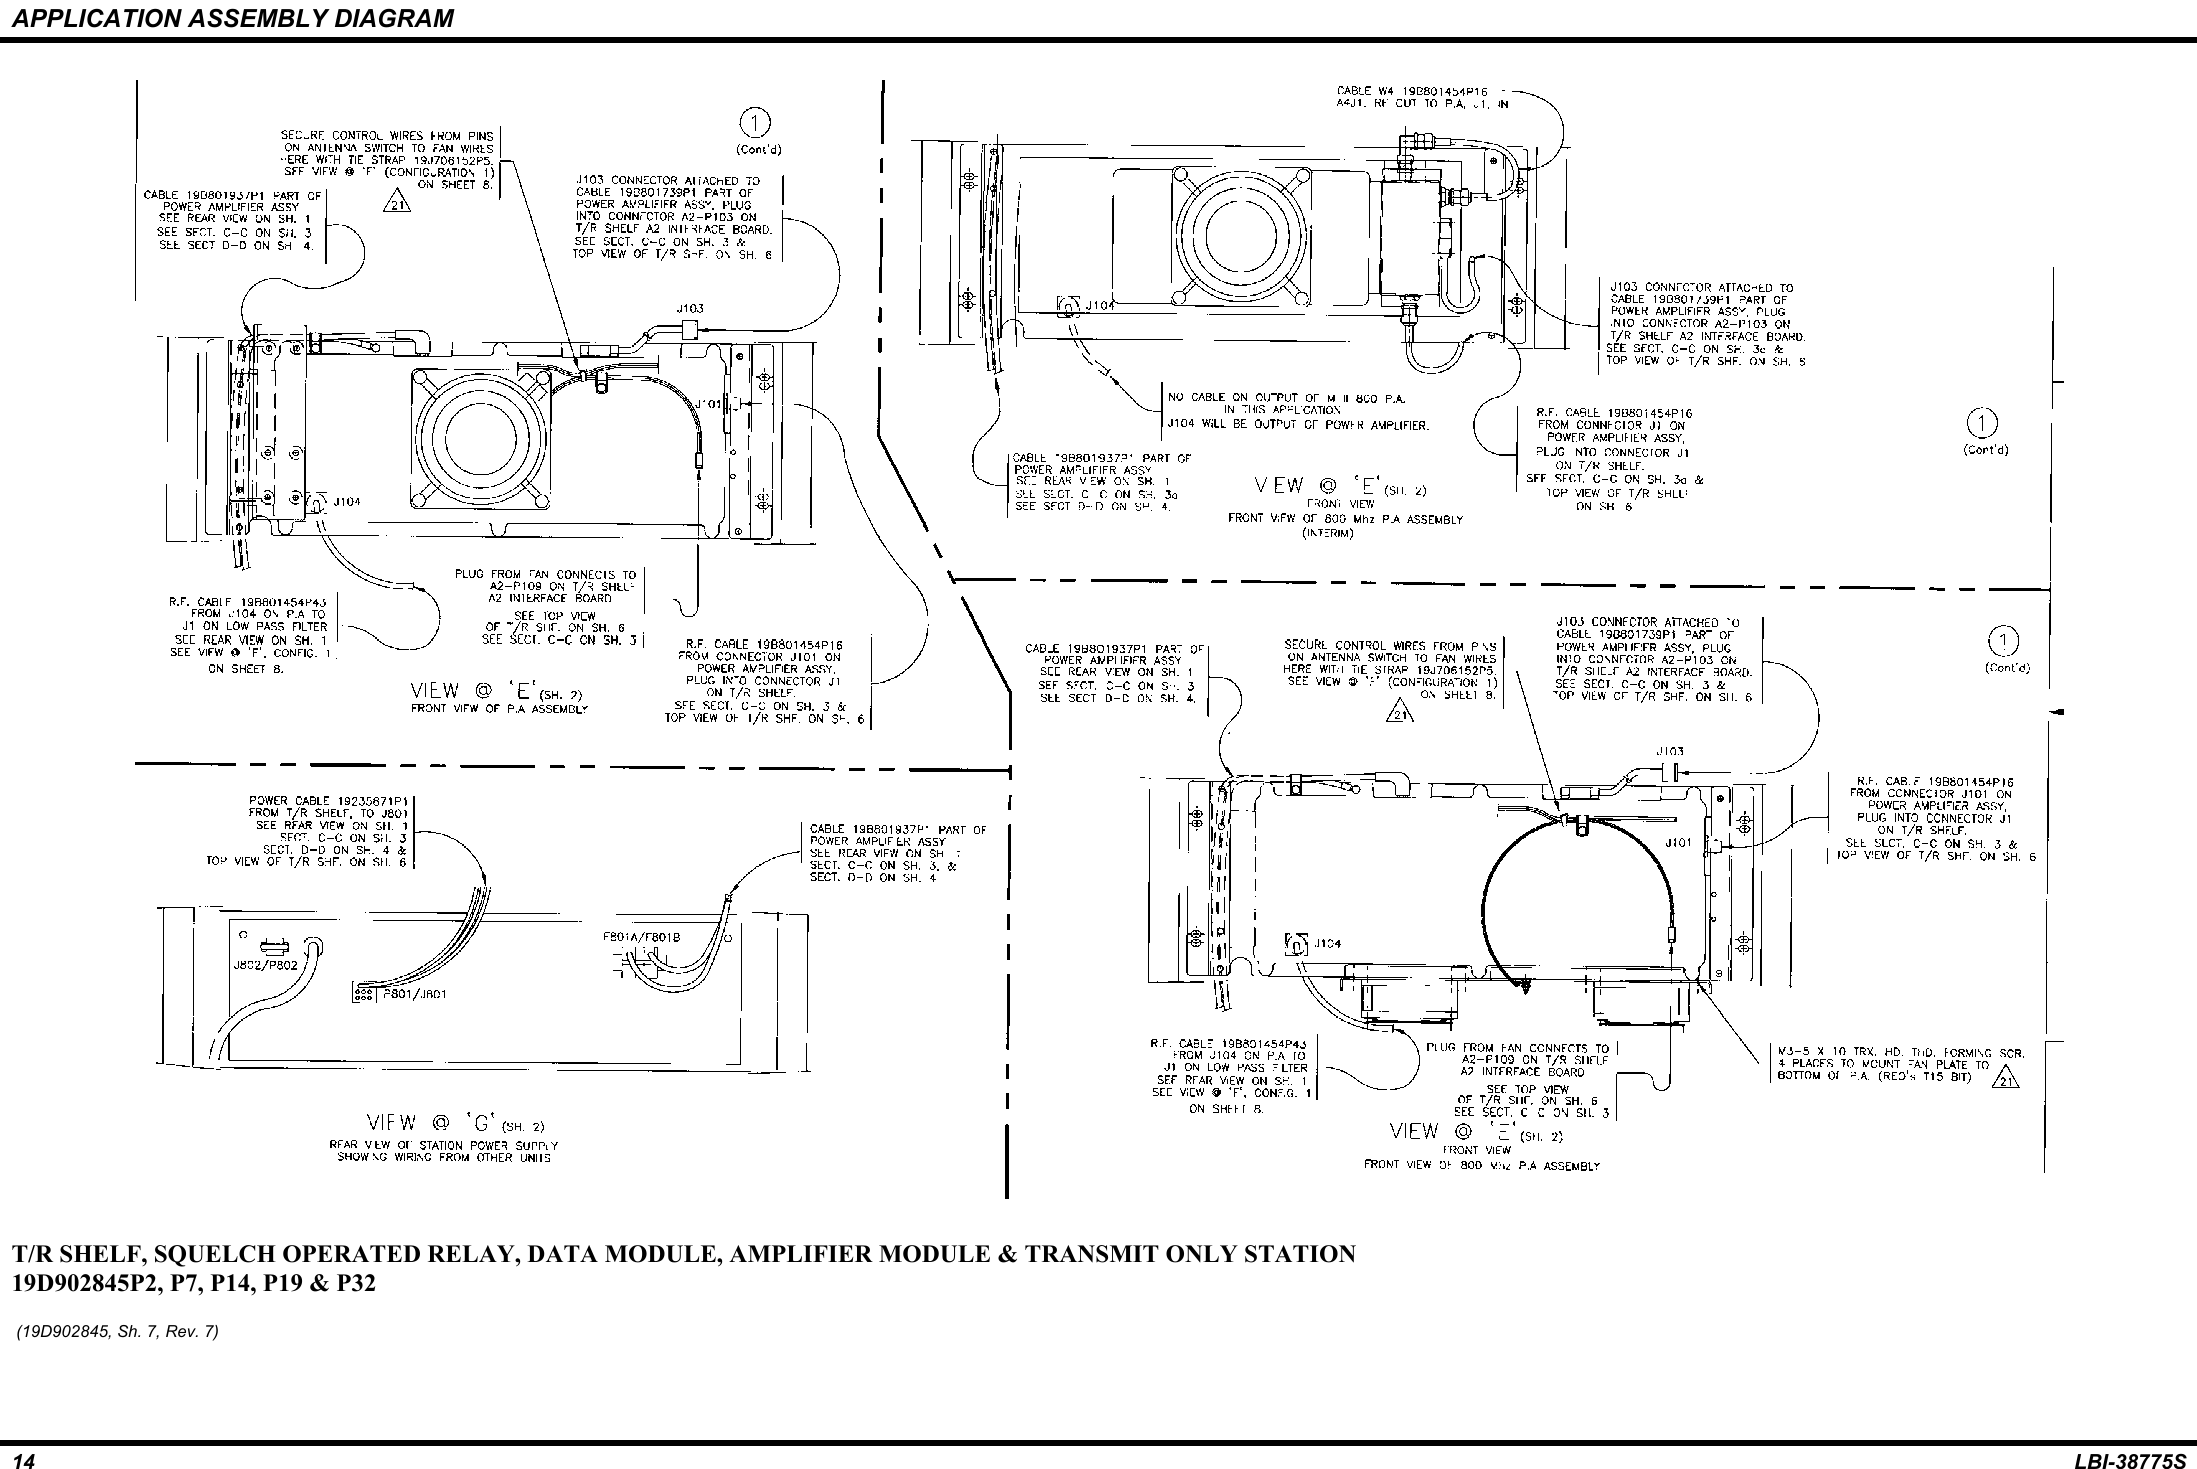 APPLICATION ASSEMBLY DIAGRAM14 LBI-38775ST/R SHELF, SQUELCH OPERATED RELAY, DATA MODULE, AMPLIFIER MODULE &amp; TRANSMIT ONLY STATION19D902845P2, P7, P14, P19 &amp; P32 (19D902845, Sh. 7, Rev. 7)